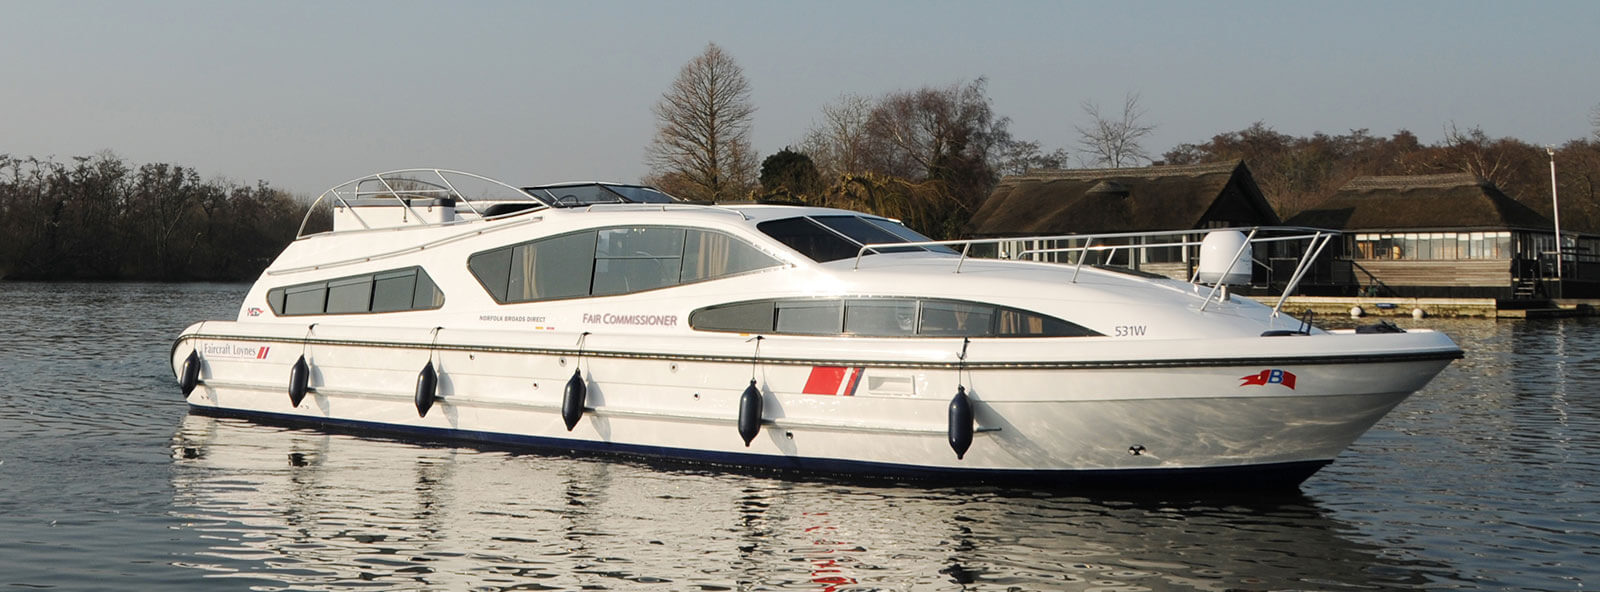 A luxury cruiser being used for a norfolk broads boat hire